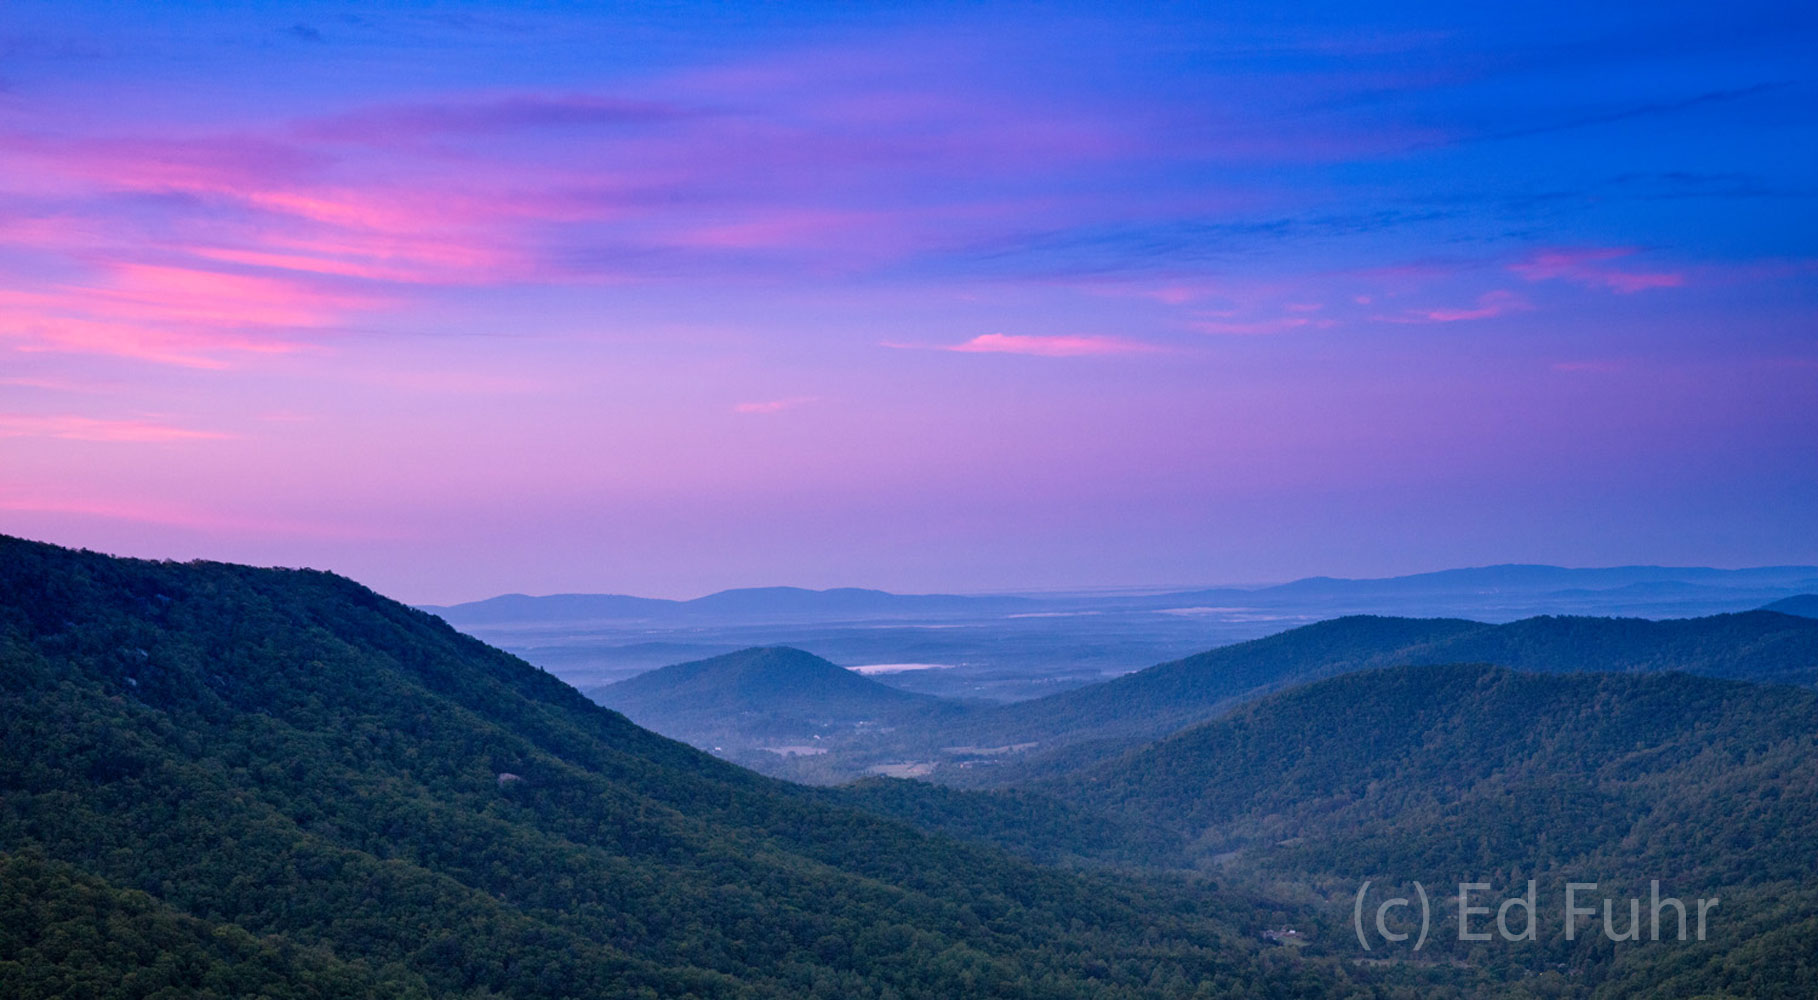 A gentle sunset of purples, pinks and magentas color the evening sky this spring in 2016.